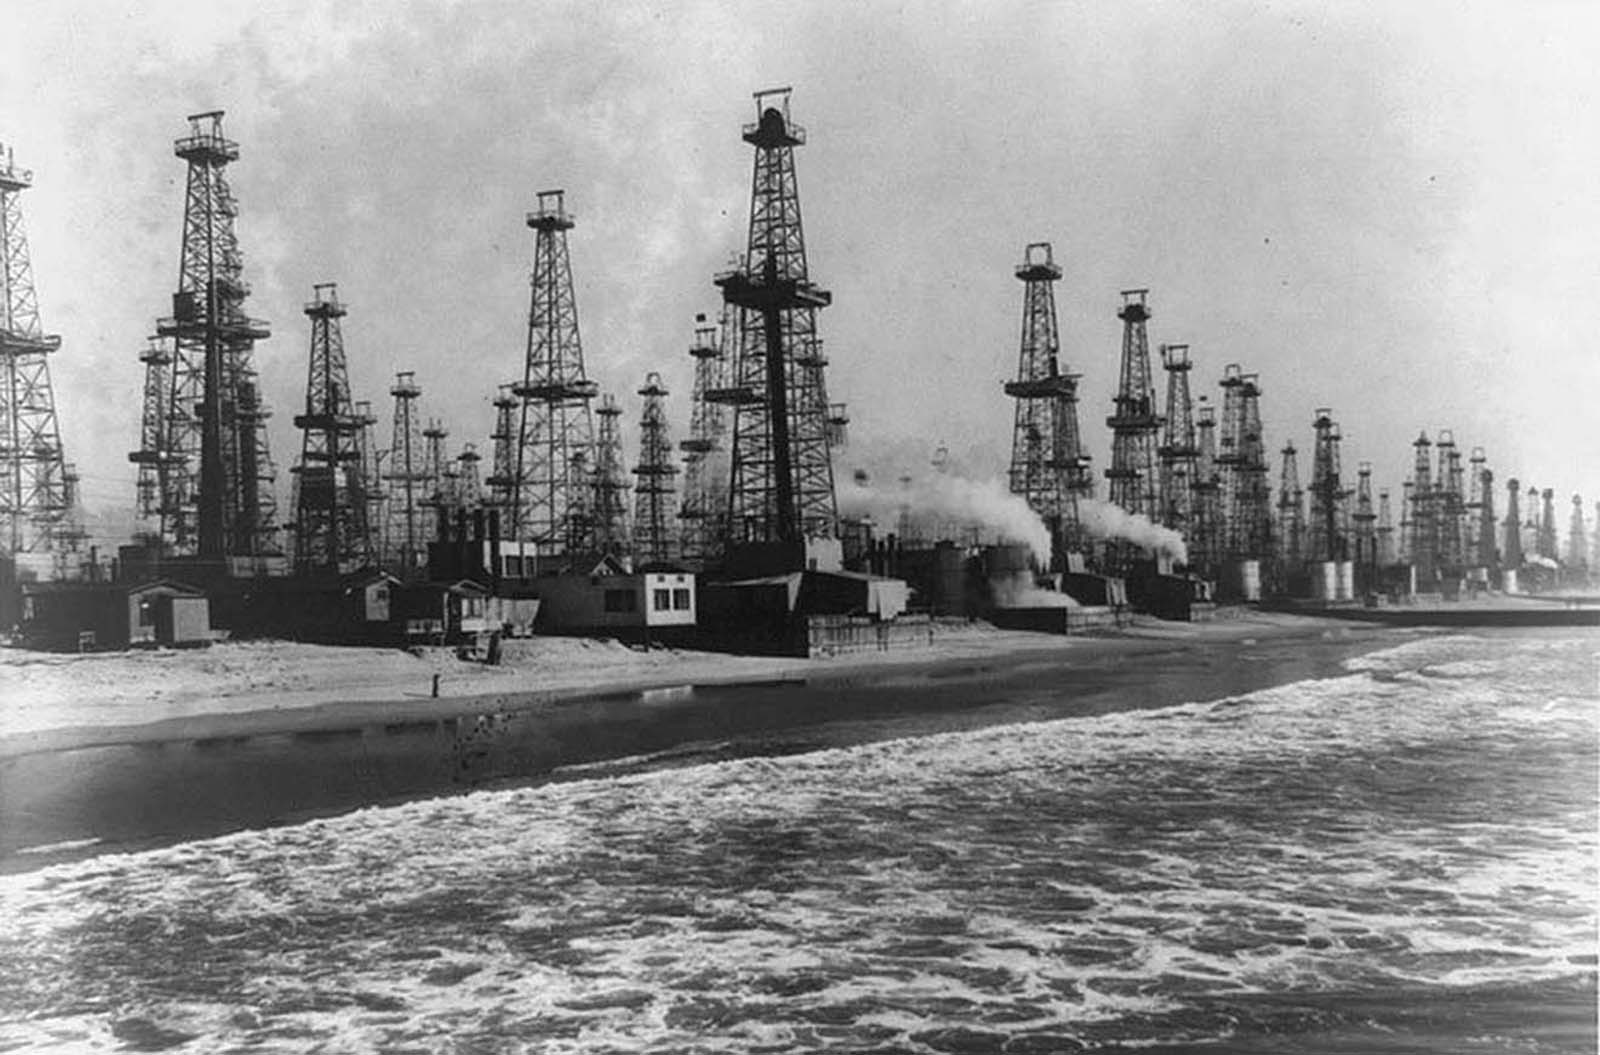 Oil wells in Venice, California, bringing oil up from beach area in 1952